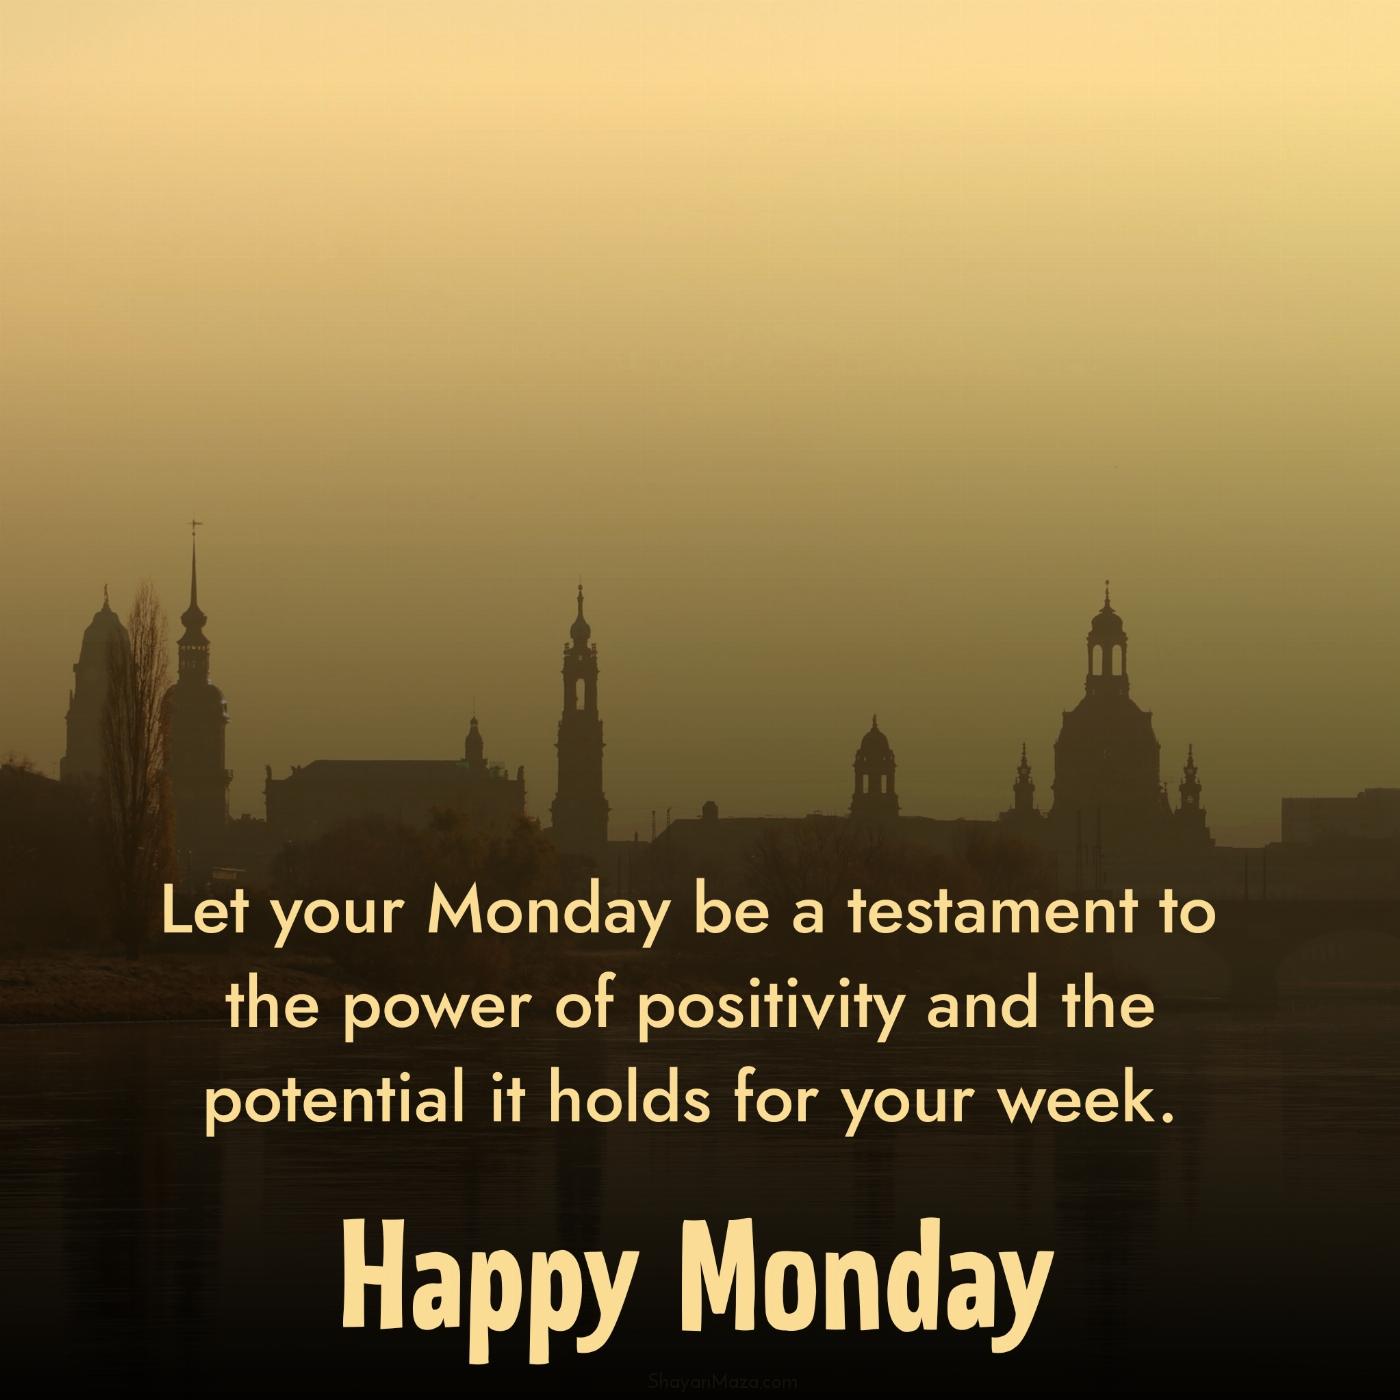 Let your Monday be a testament to the power of positivity